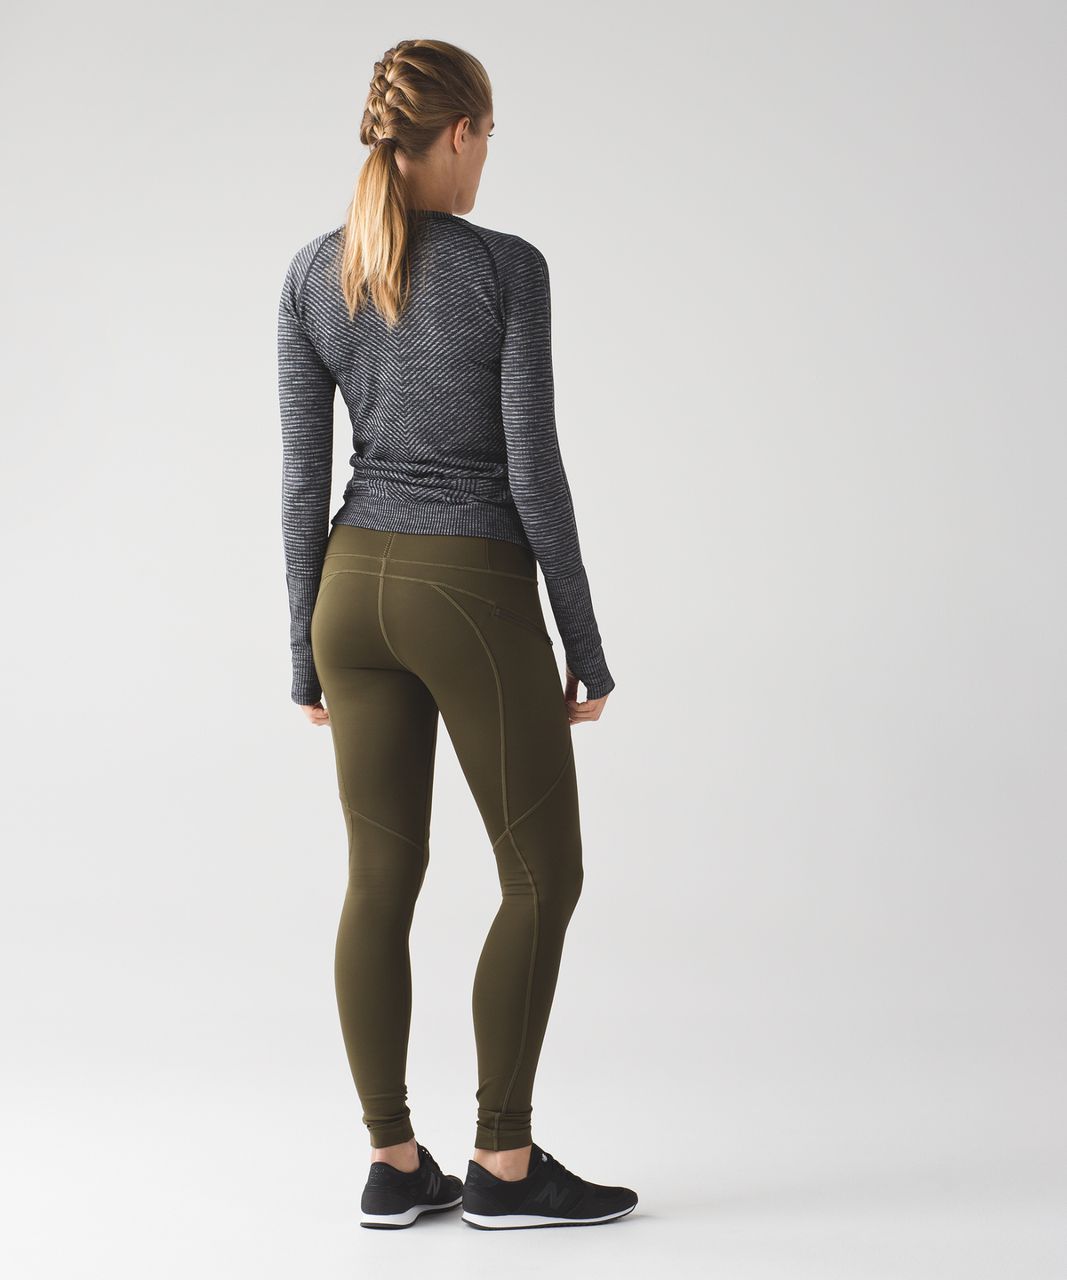 Lululemon First Mile Tech Tight - Military Green